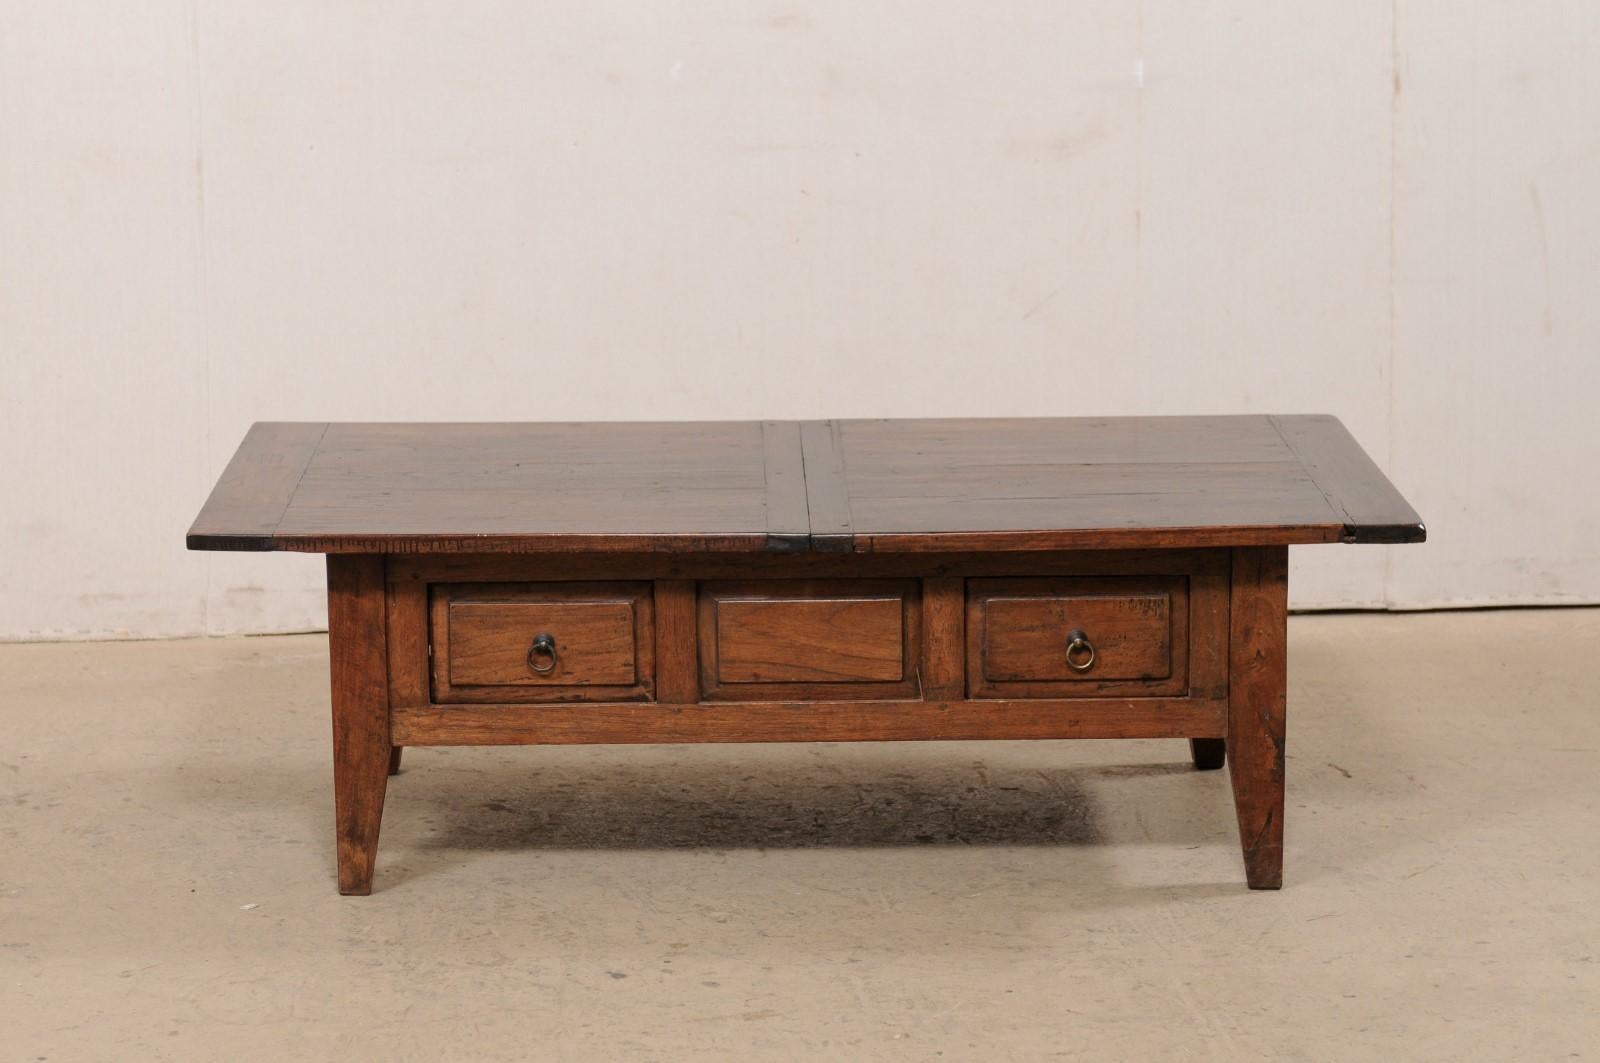 A French coffee table with two drawers from the early 20th century. This antique coffee table has a rectangular-shaped top which hangs over an apron below that houses a pair of raised-panel front drawers at one long side, with the raised panel motif